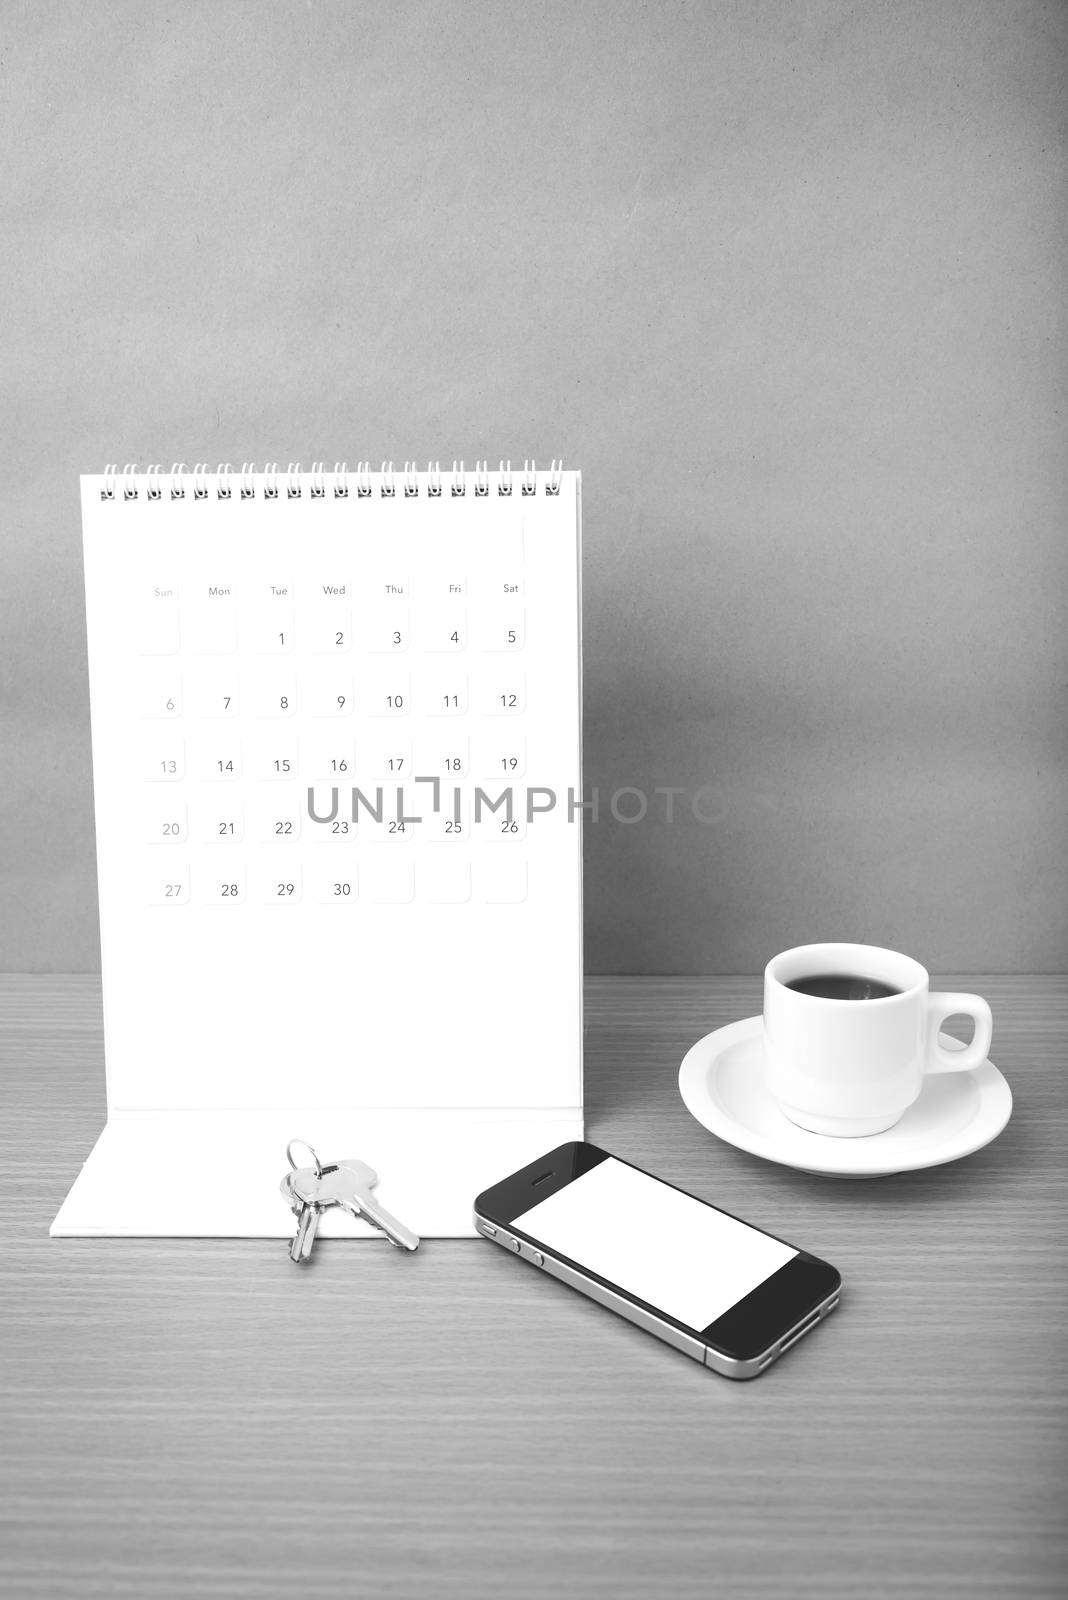 coffee,phone,key and calendar on wood table background black and white color